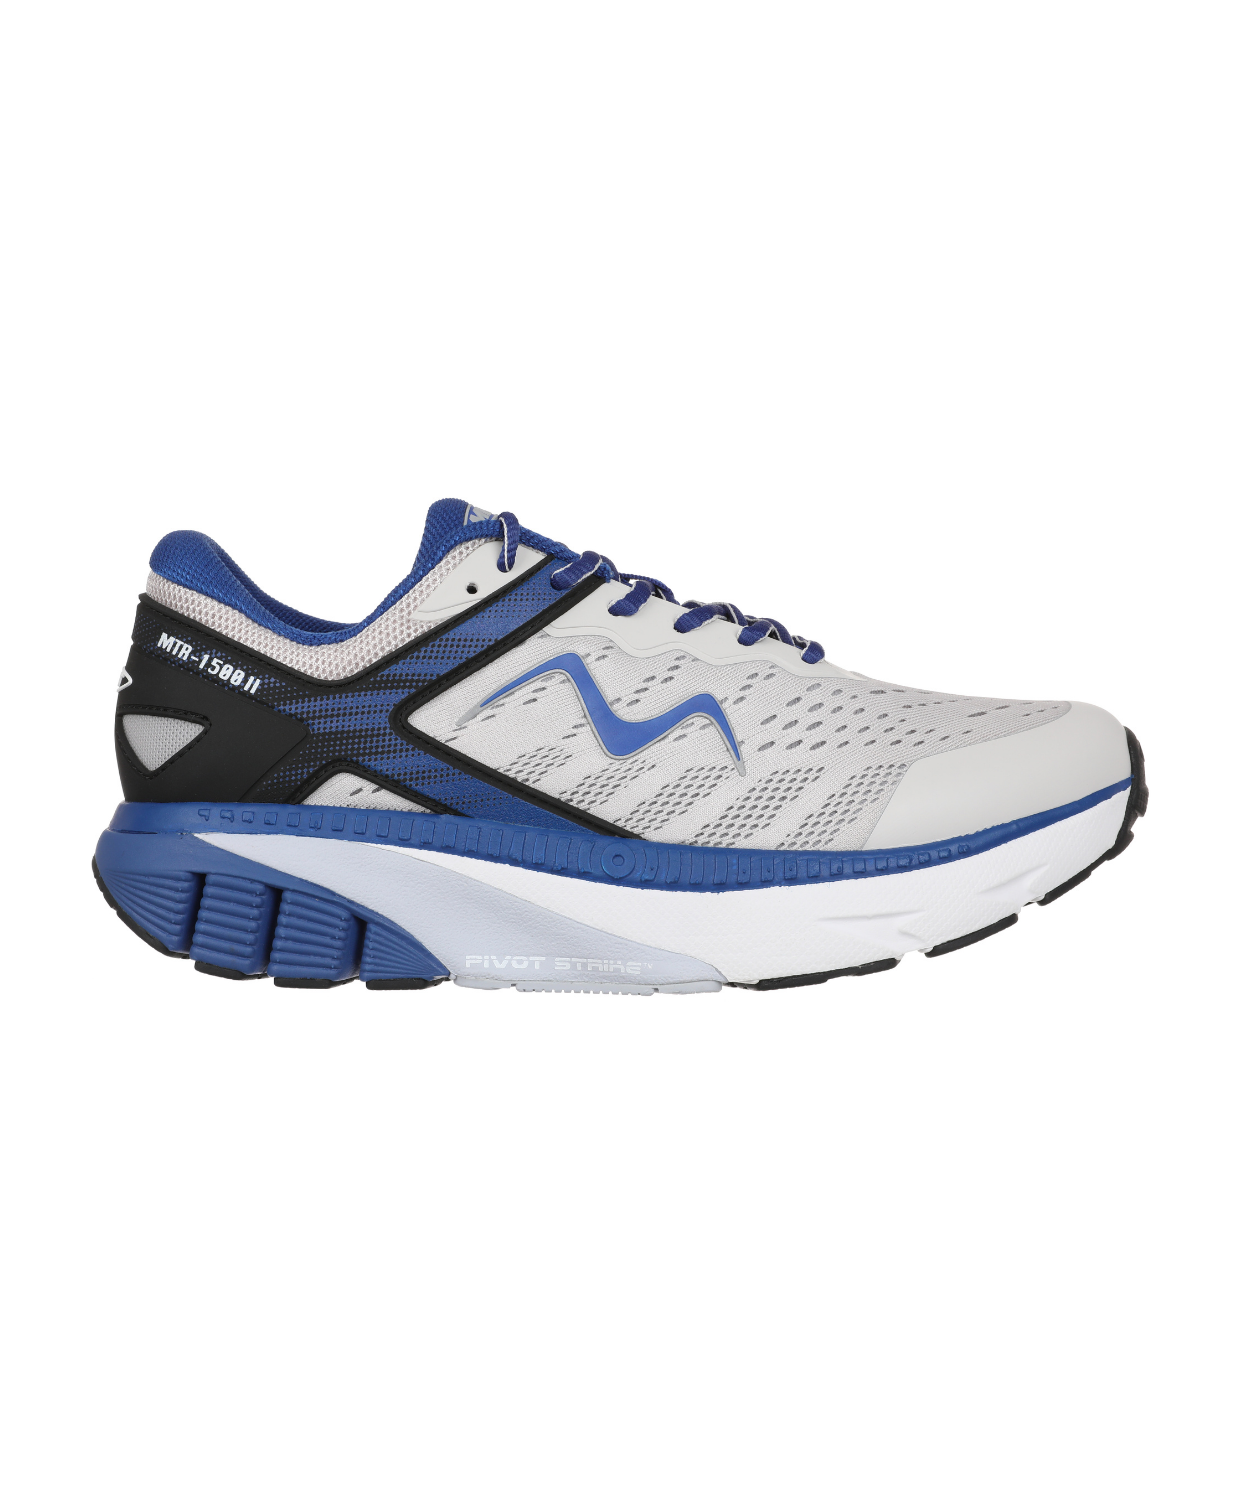 MBT MTR-1500 II Lace Up Grey/Blue Mens Sneakers